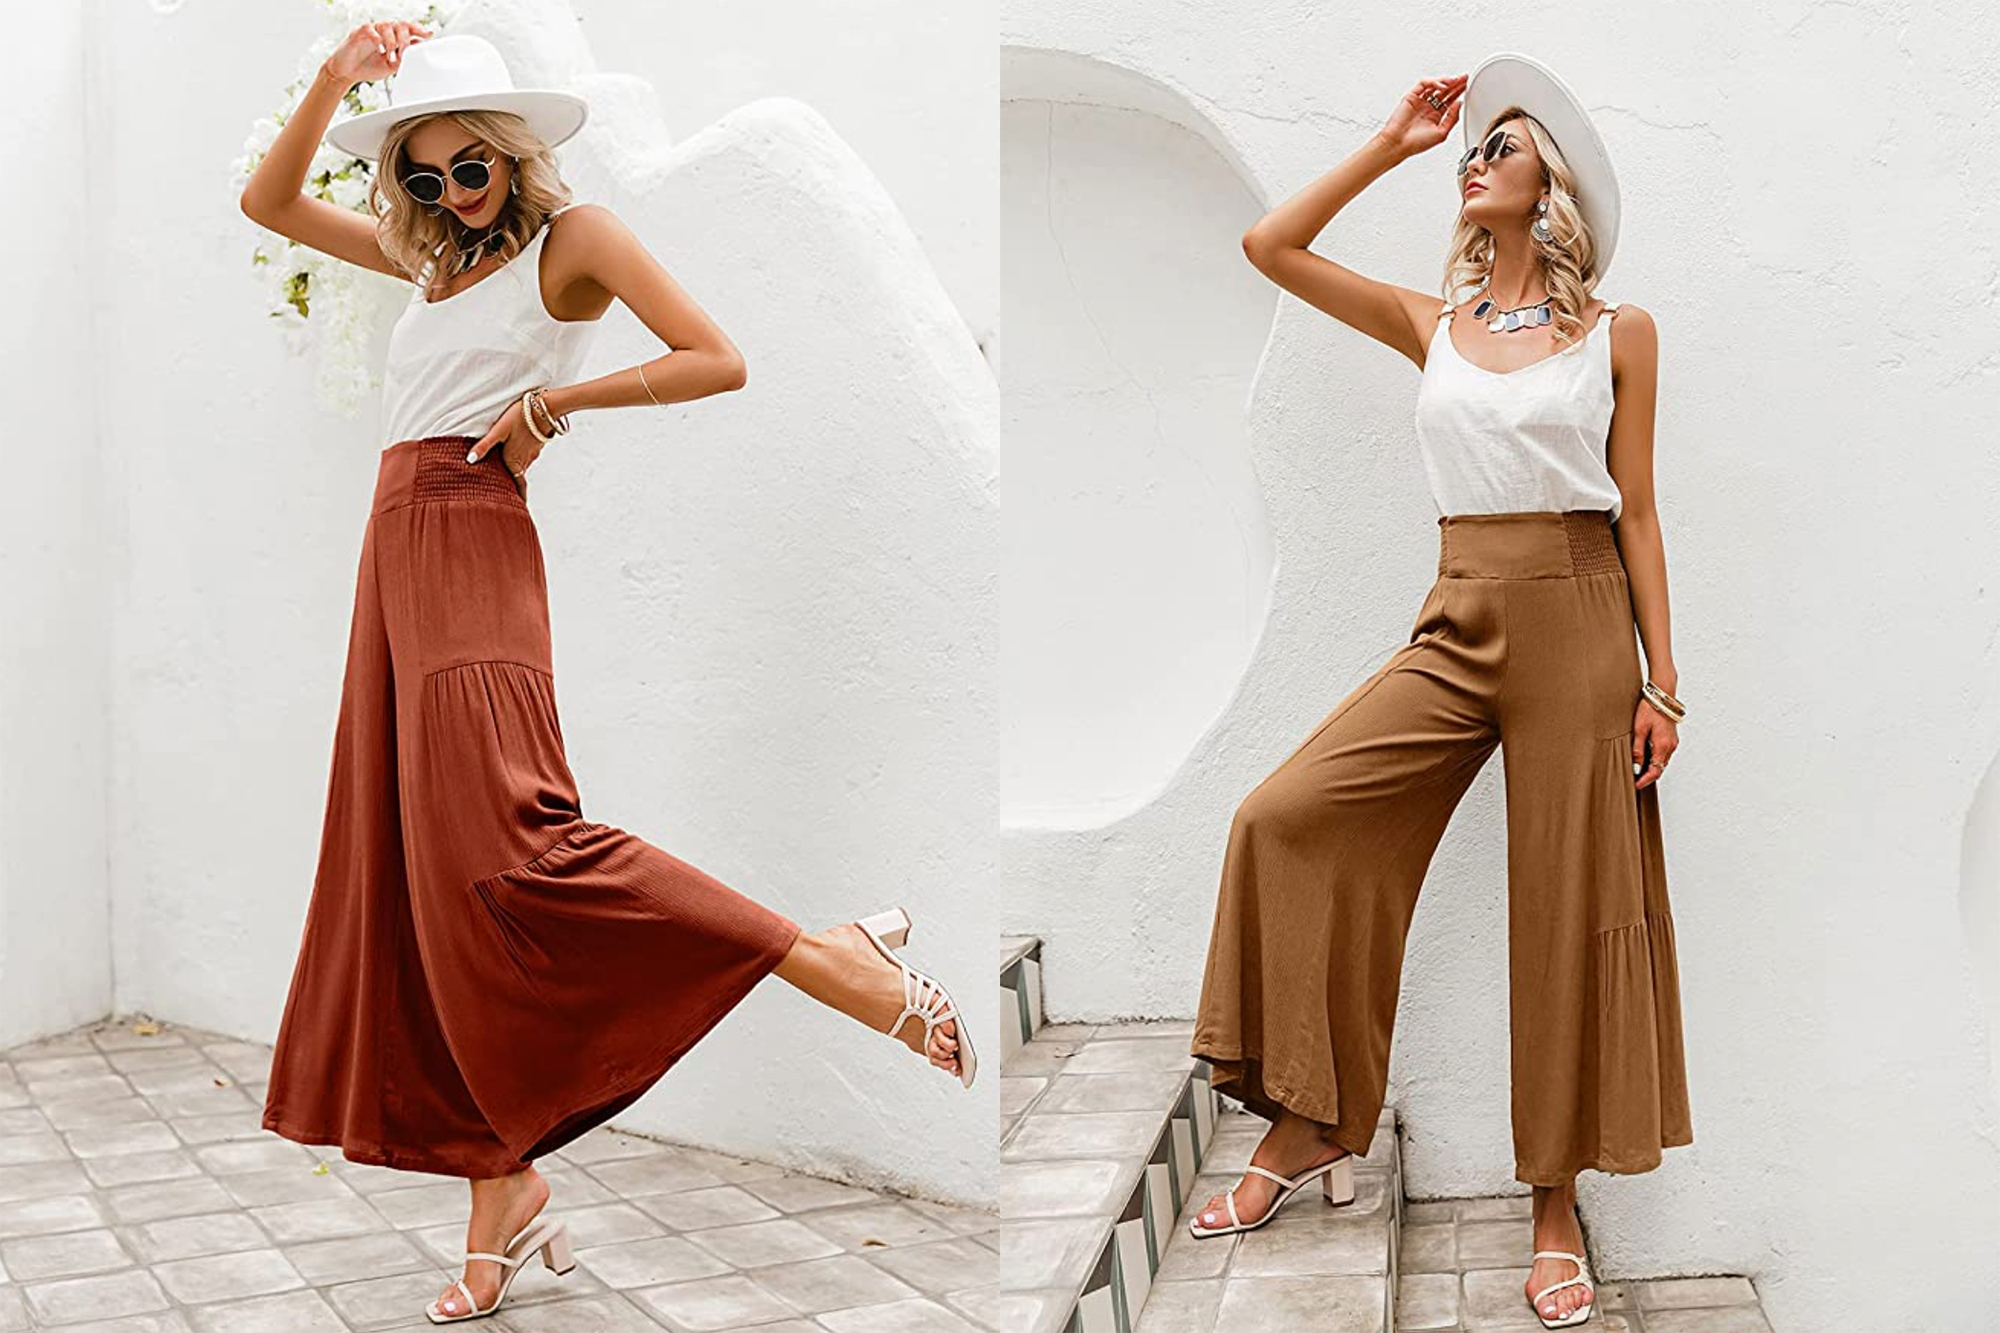 Gracevines Palazzo Pants Are a Major Secret Style Find on Amazon